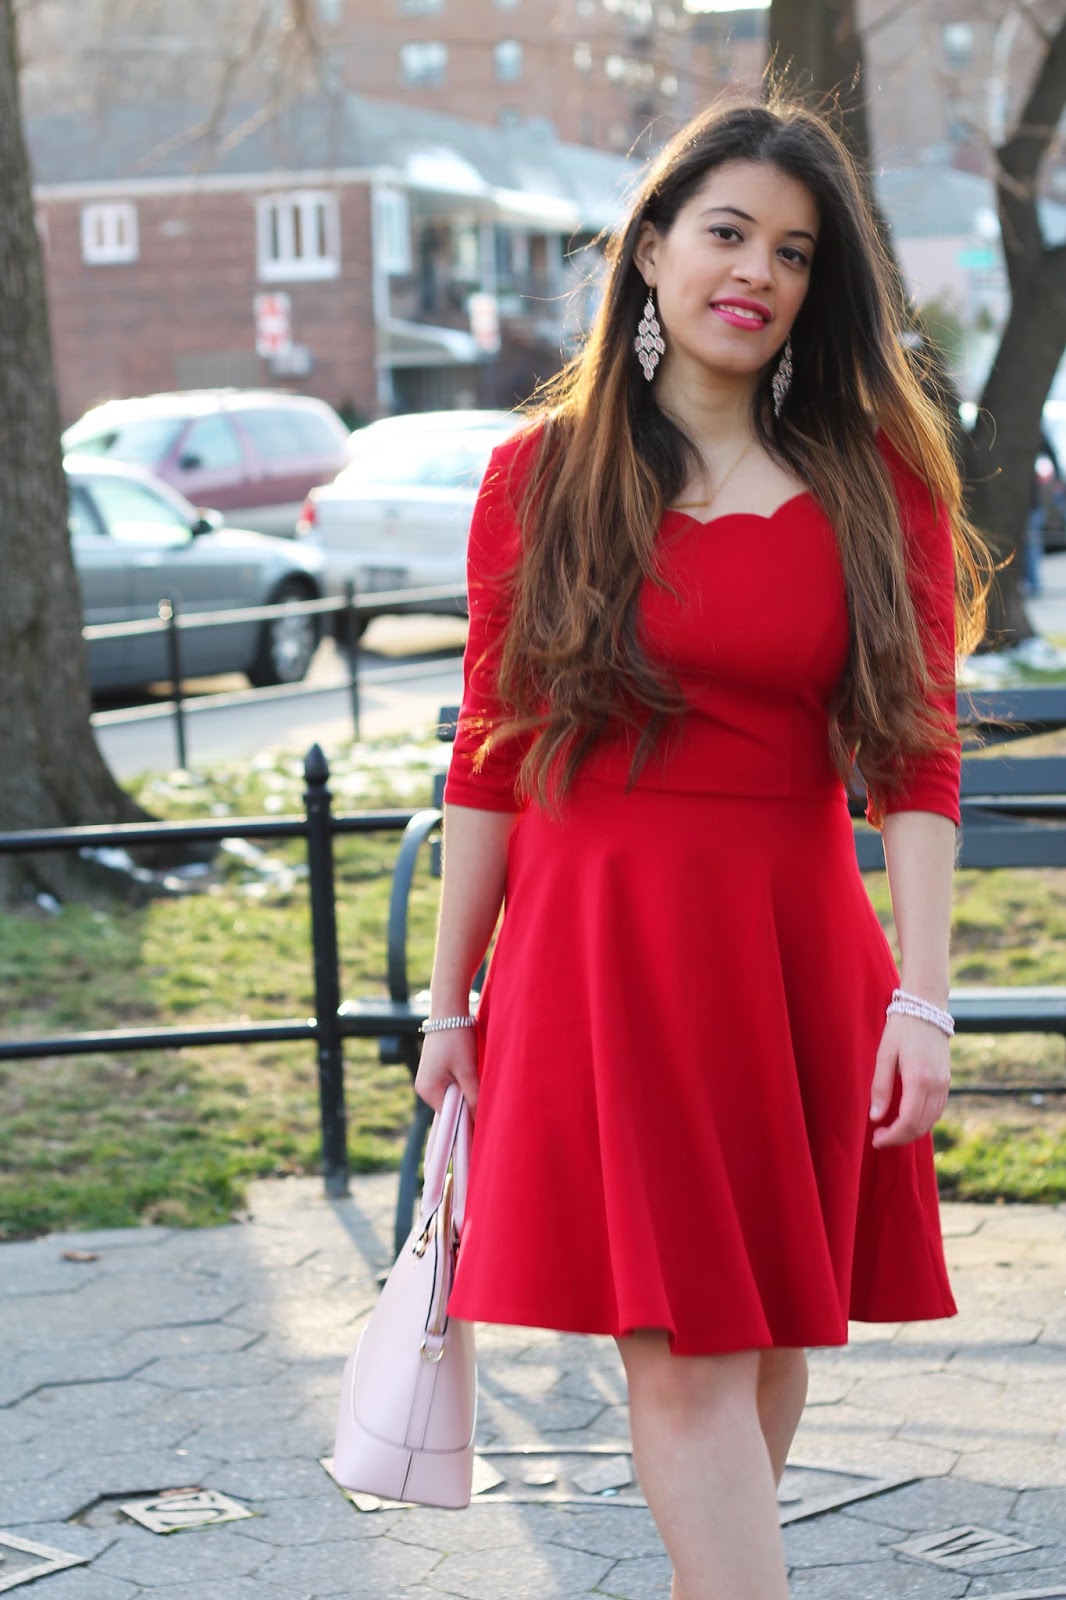 Valentines day, valentines, galentines, red, pink, lulus, kate spade, scalloped dress, scallops, ankle strap, nude heels, nine west, valentines day look, simple,  blogger, latina, nyc blogger, nyc